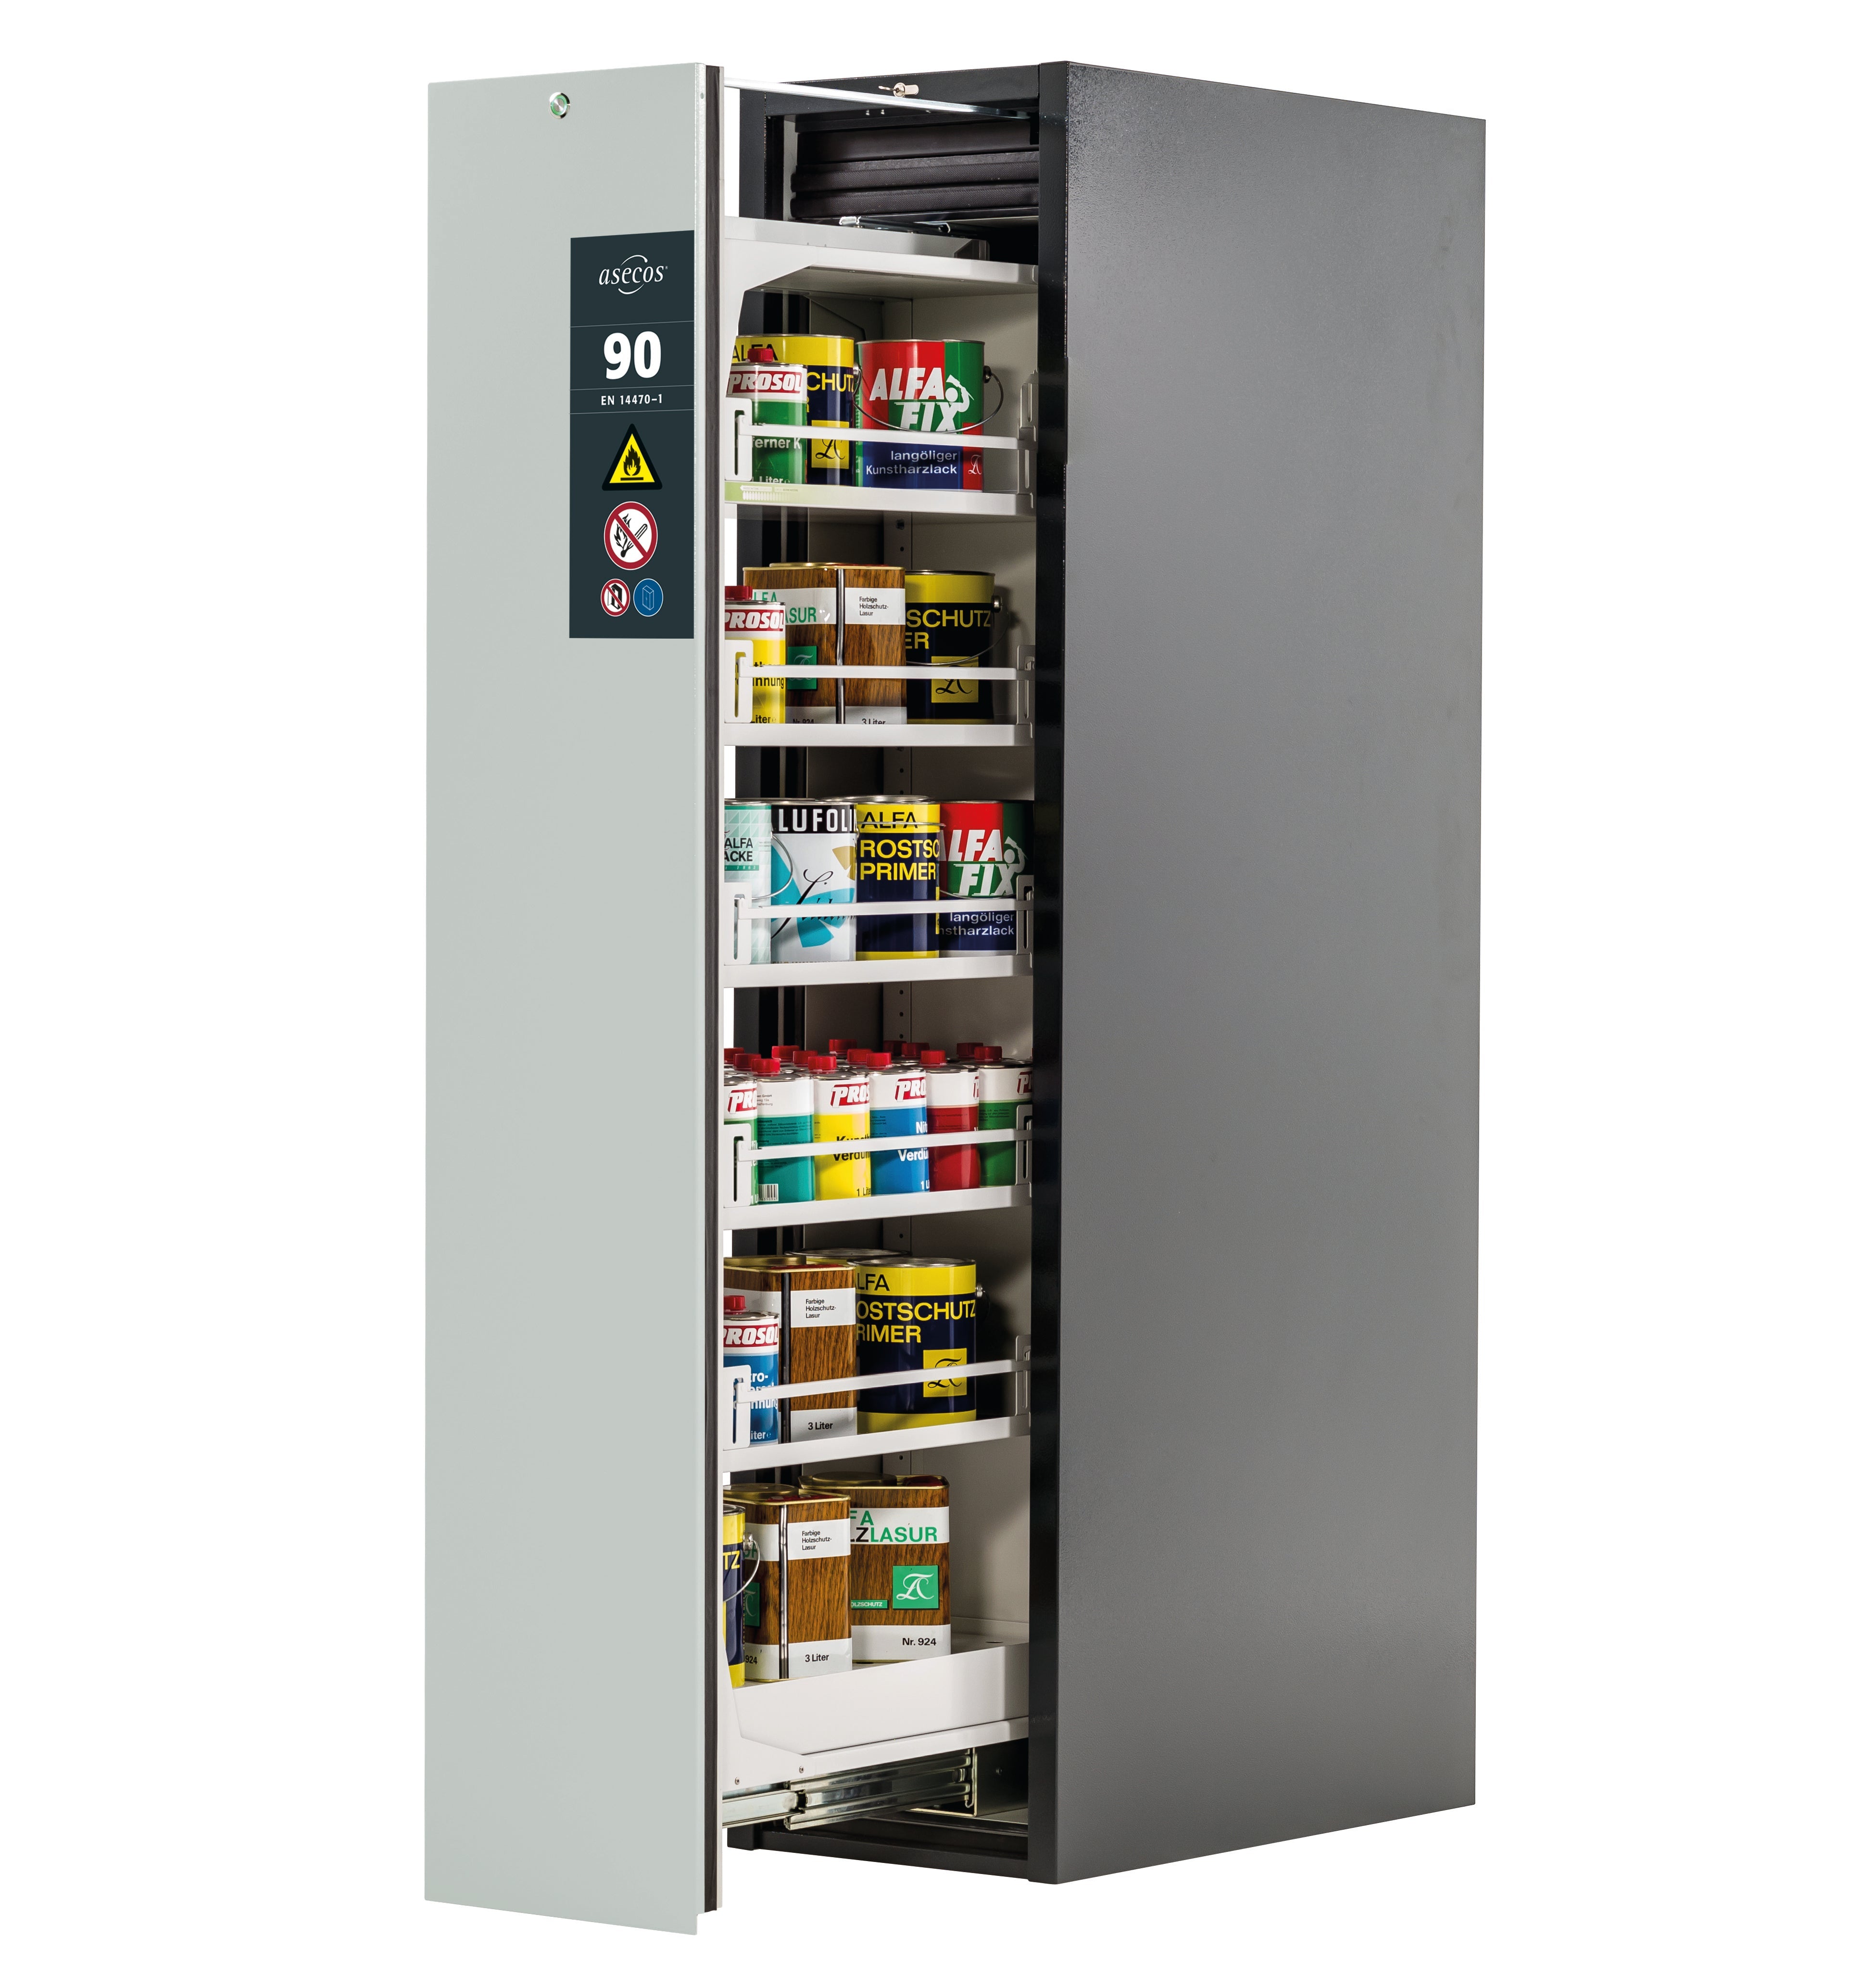 Type 90 safety cabinet V-MOVE-90 model V90.196.045.VDAC:0013 in light gray RAL 7035 with 5x standard shelves (sheet steel)